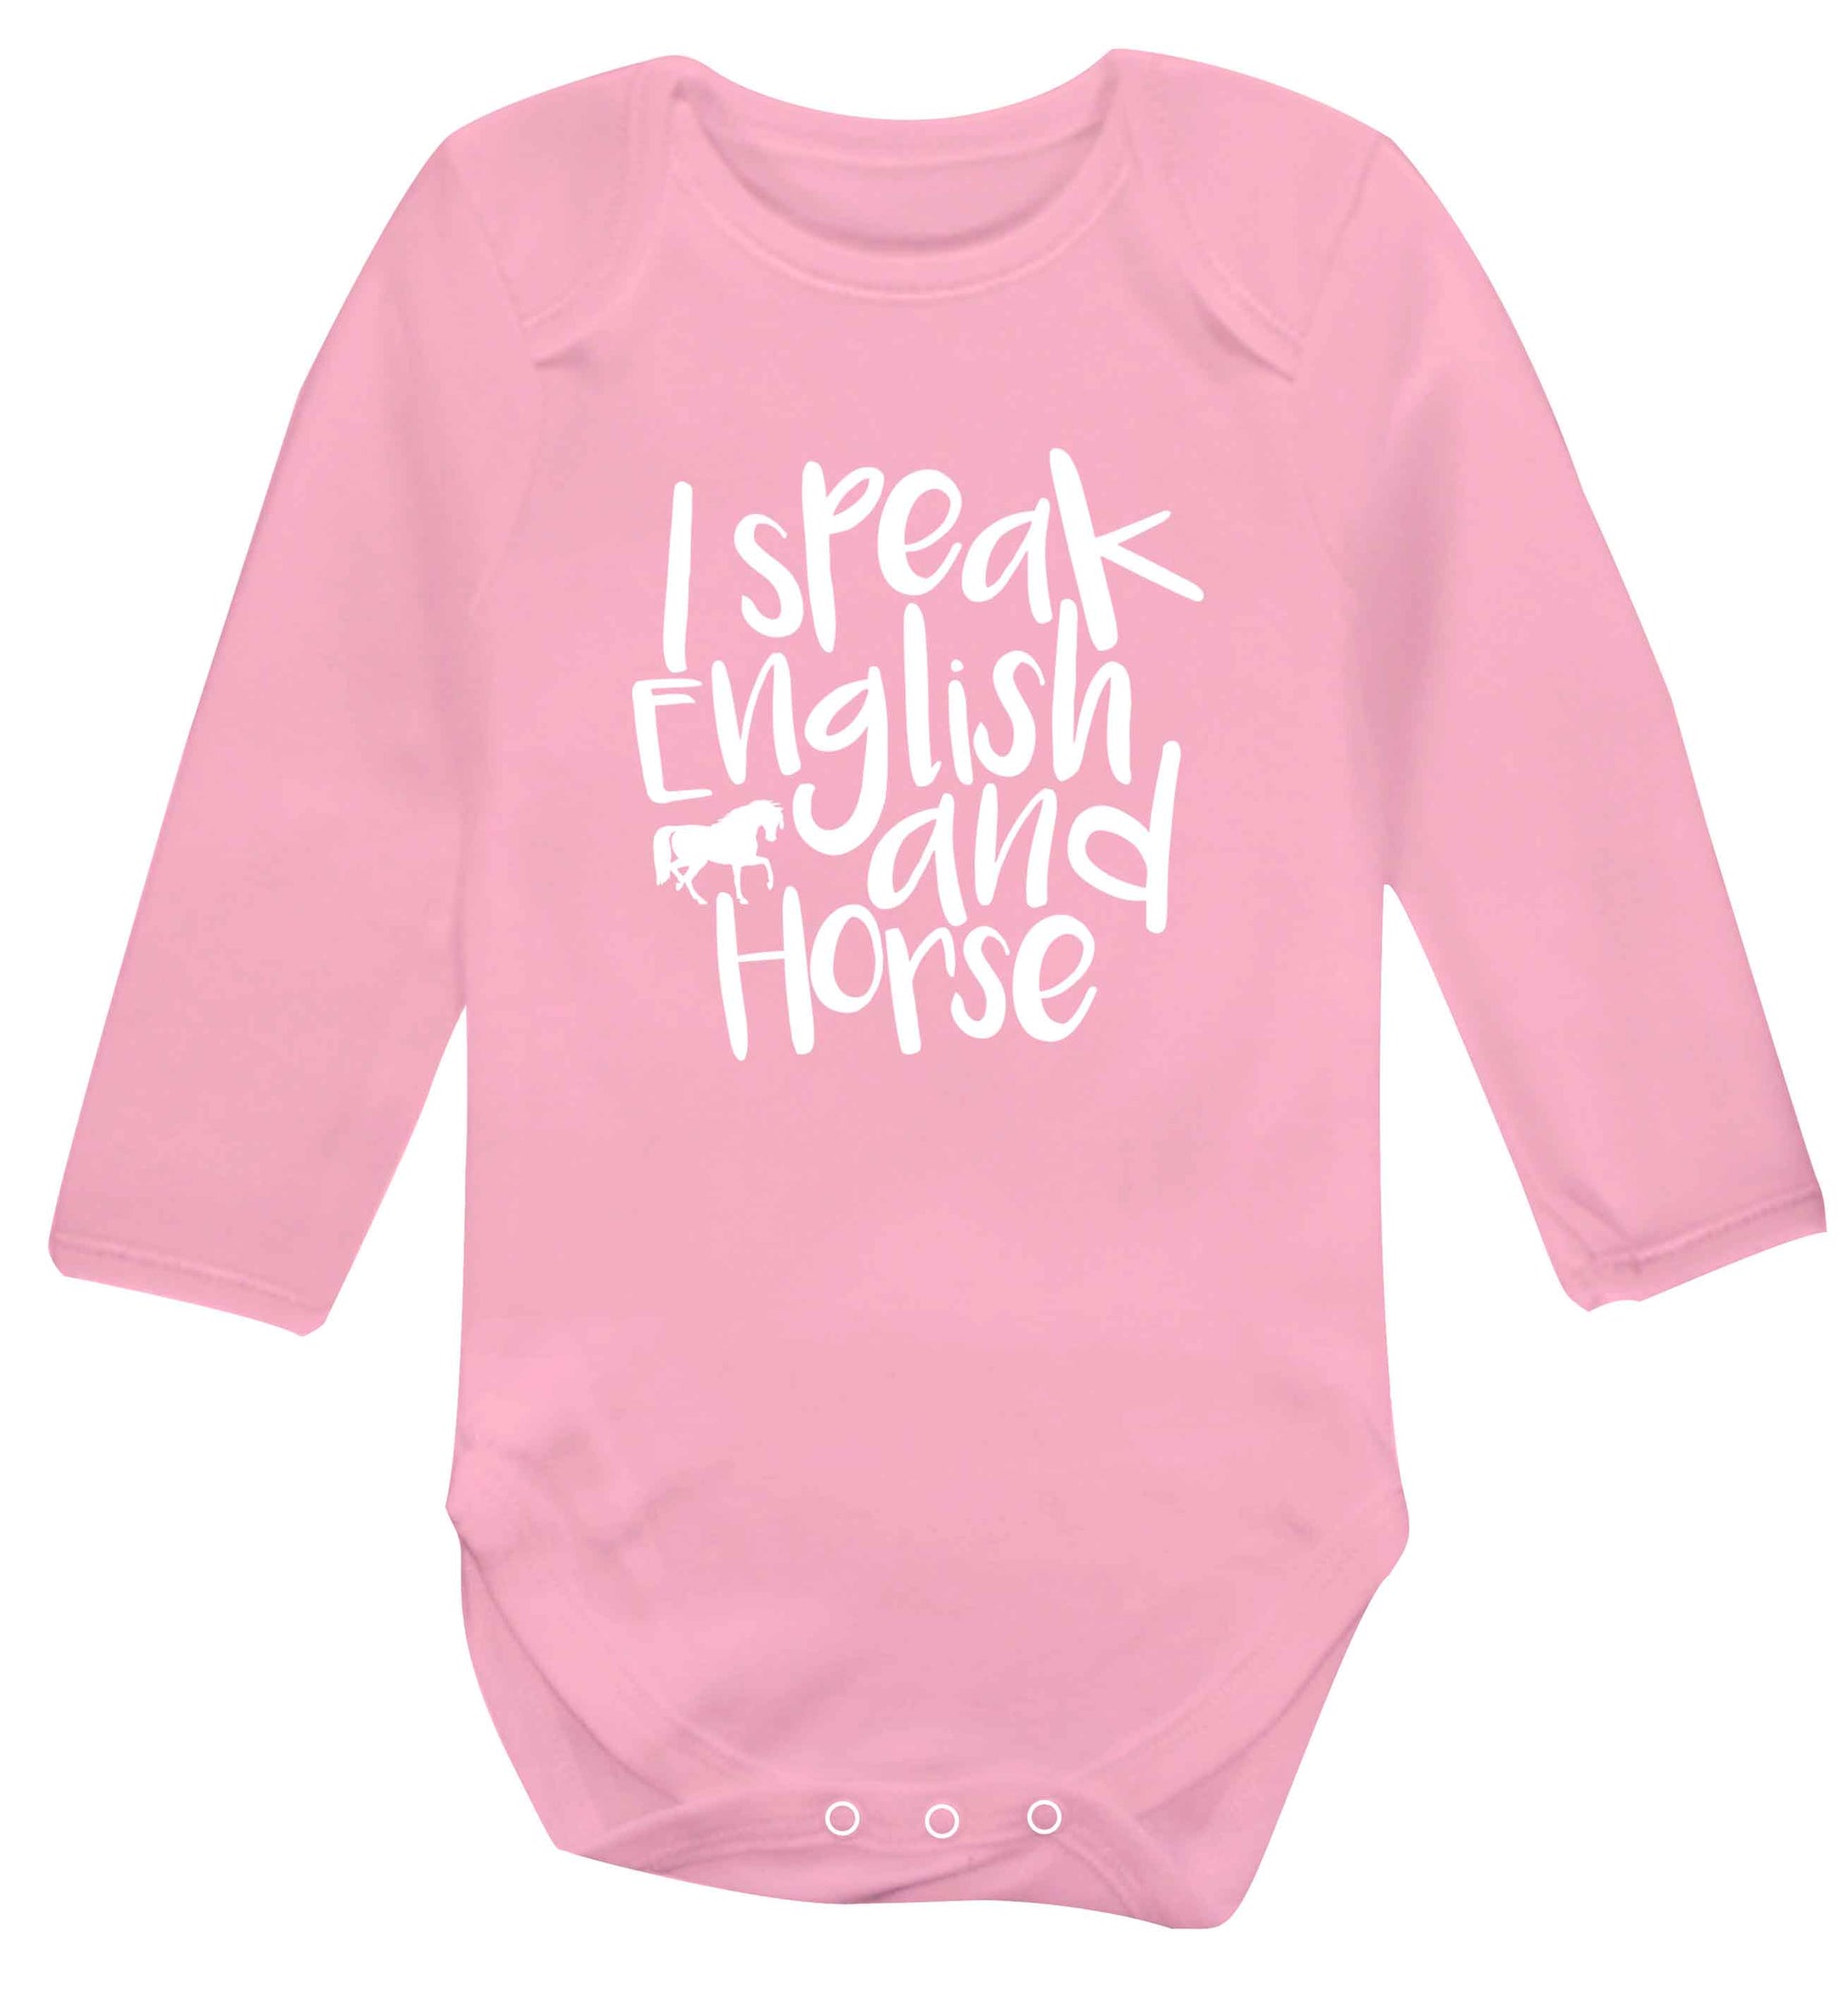 I speak English and horse baby vest long sleeved pale pink 6-12 months